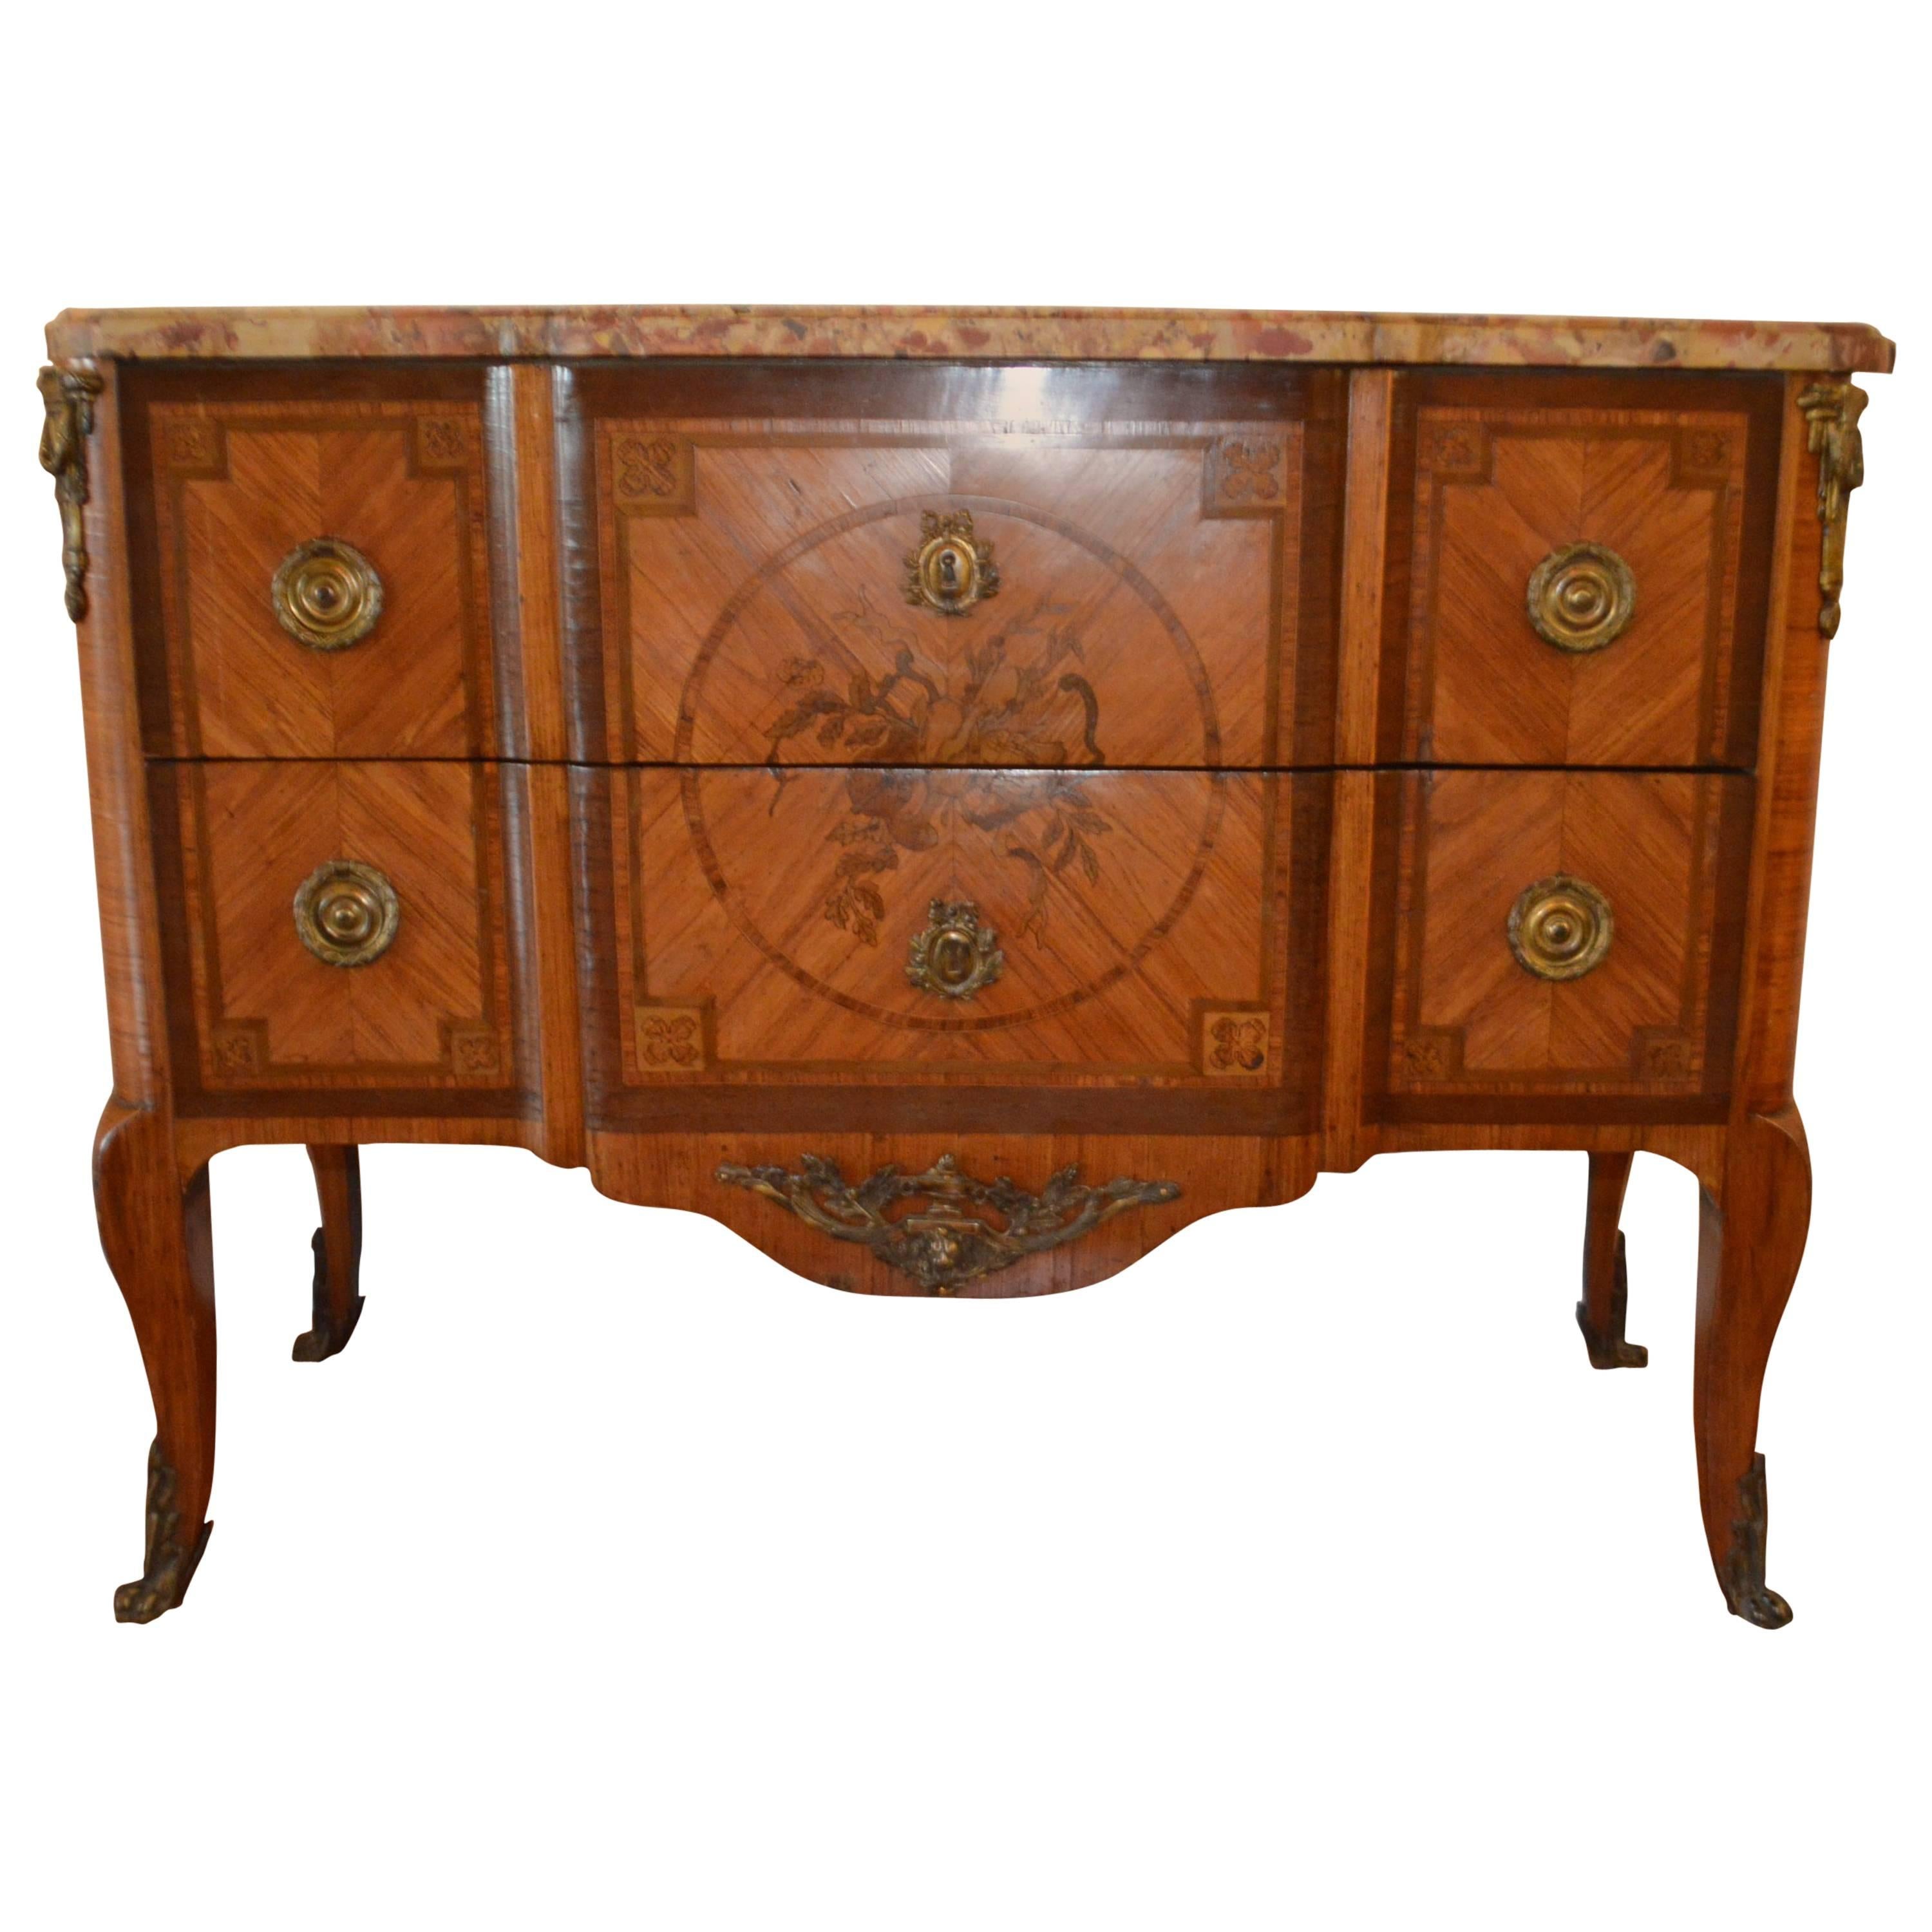 19th Century Transitional style Tulip Wood Inlay Commode with Original Marble For Sale